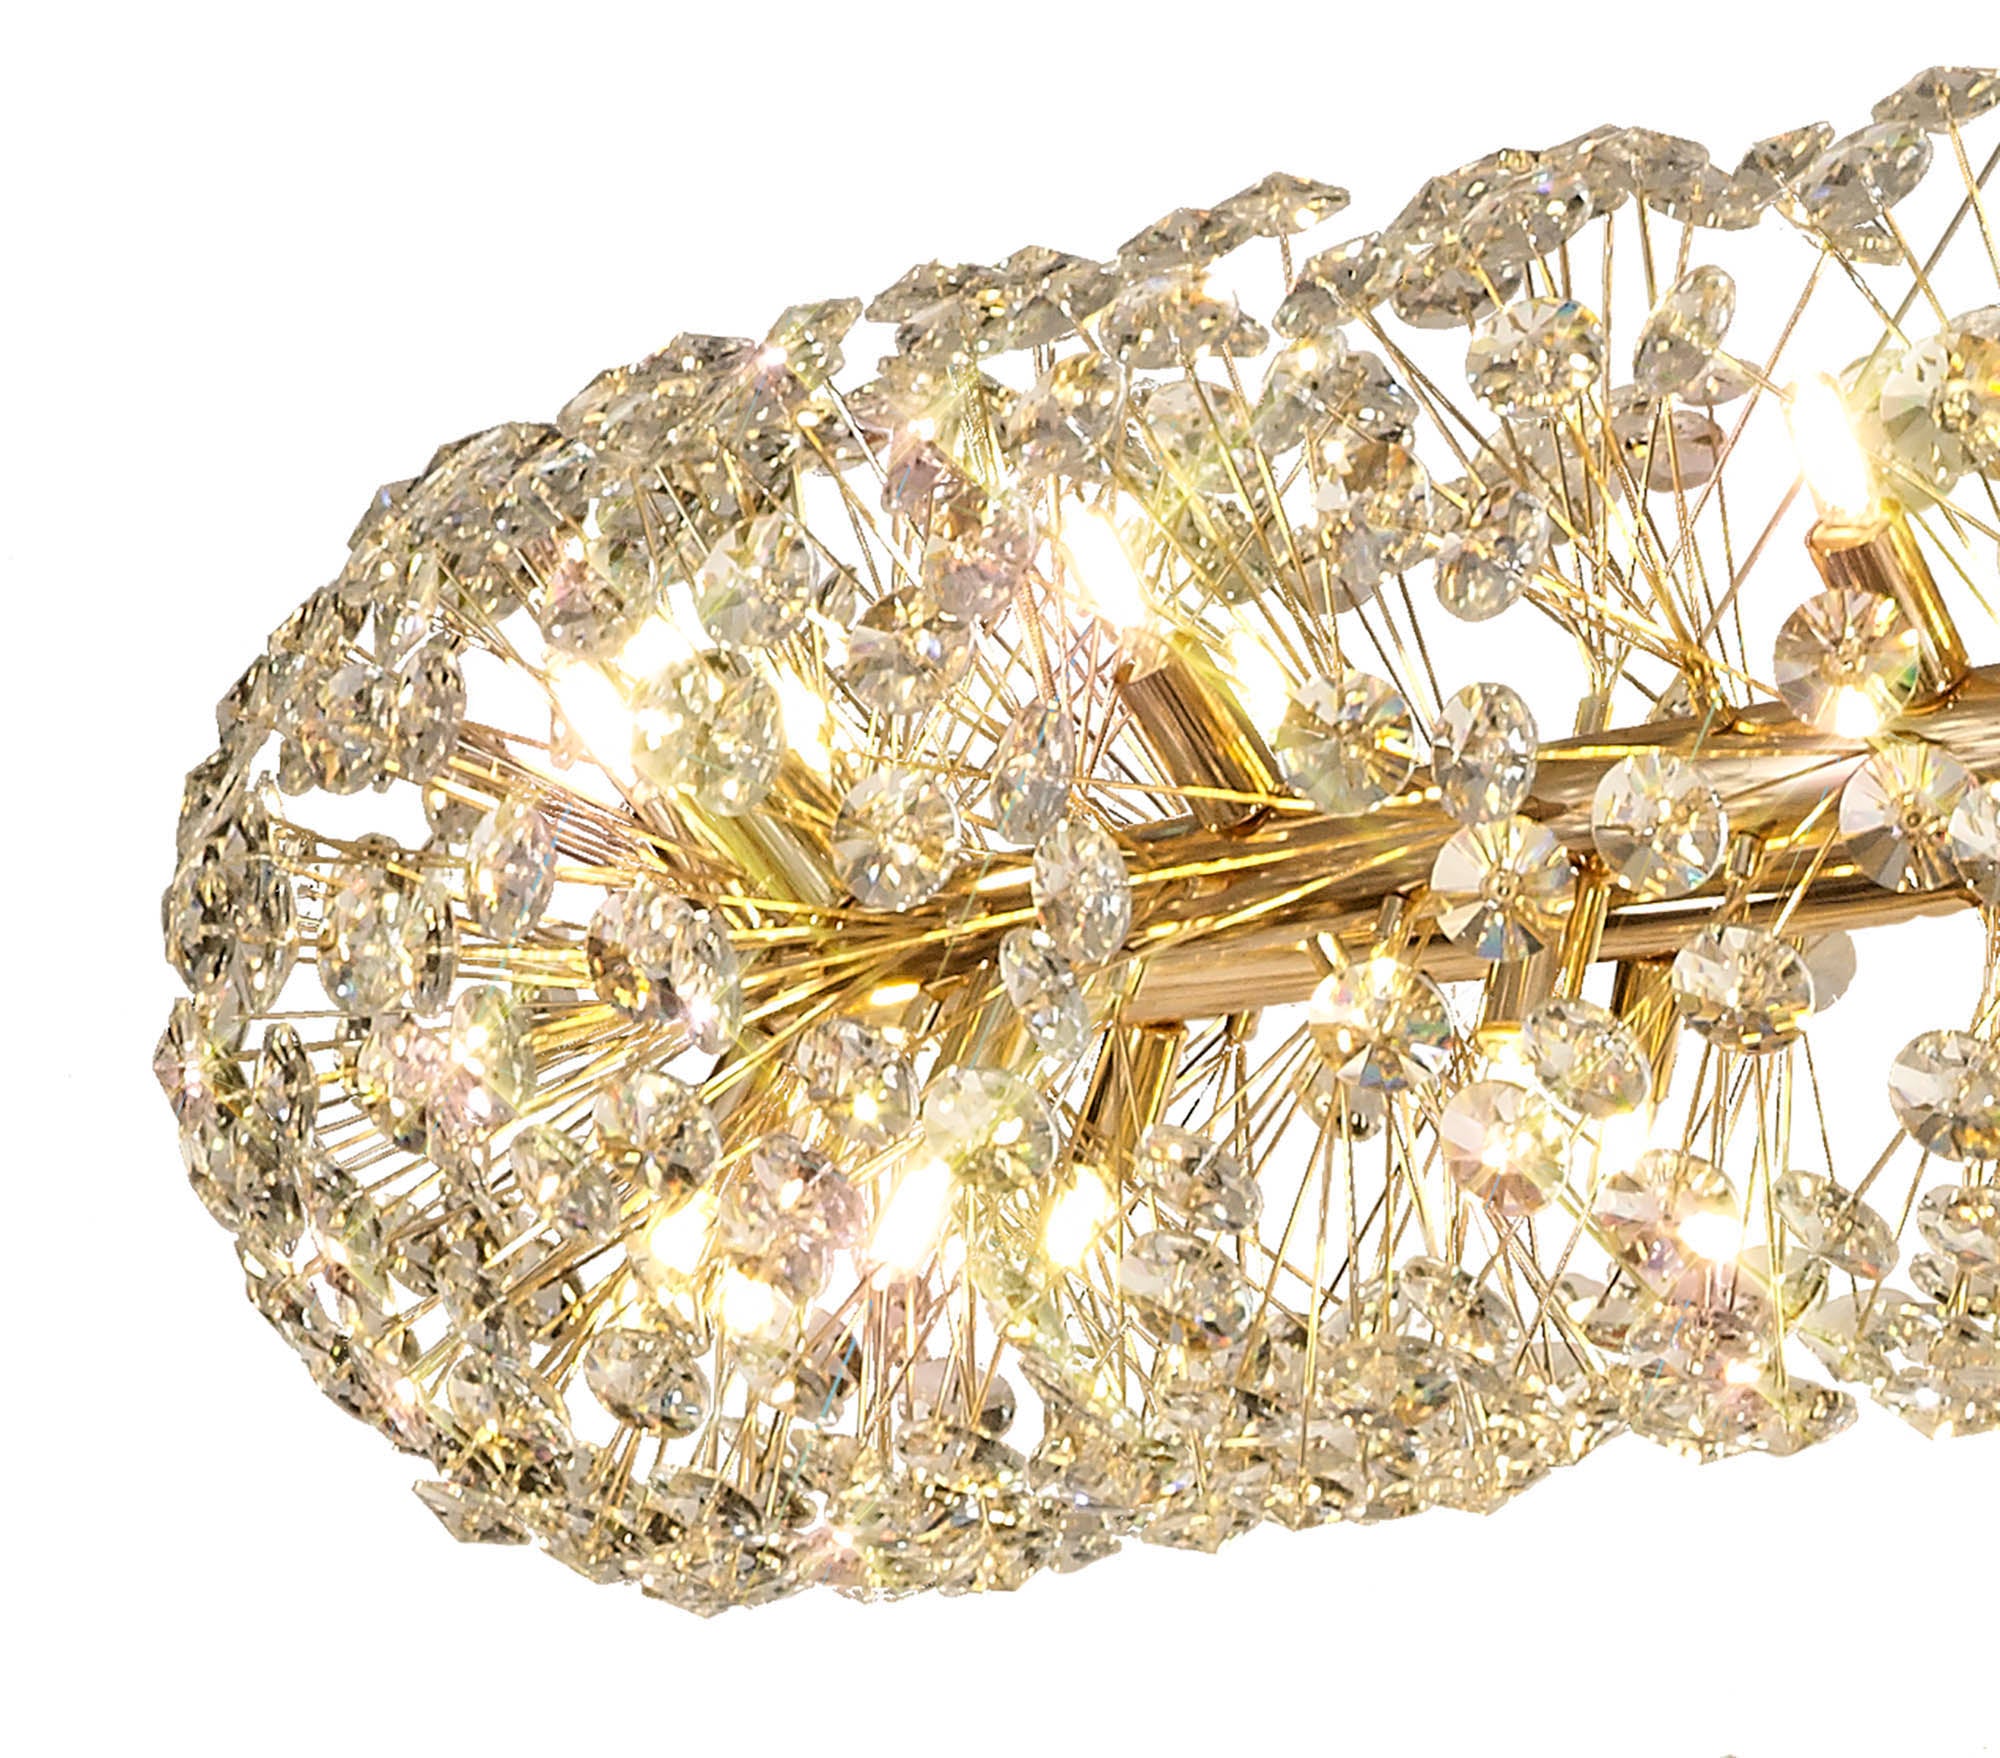 Chakkar 3 Tier Chandelier 74 Light G9 French Gold/Crystal, Item Weight: 37.6kg LO182083